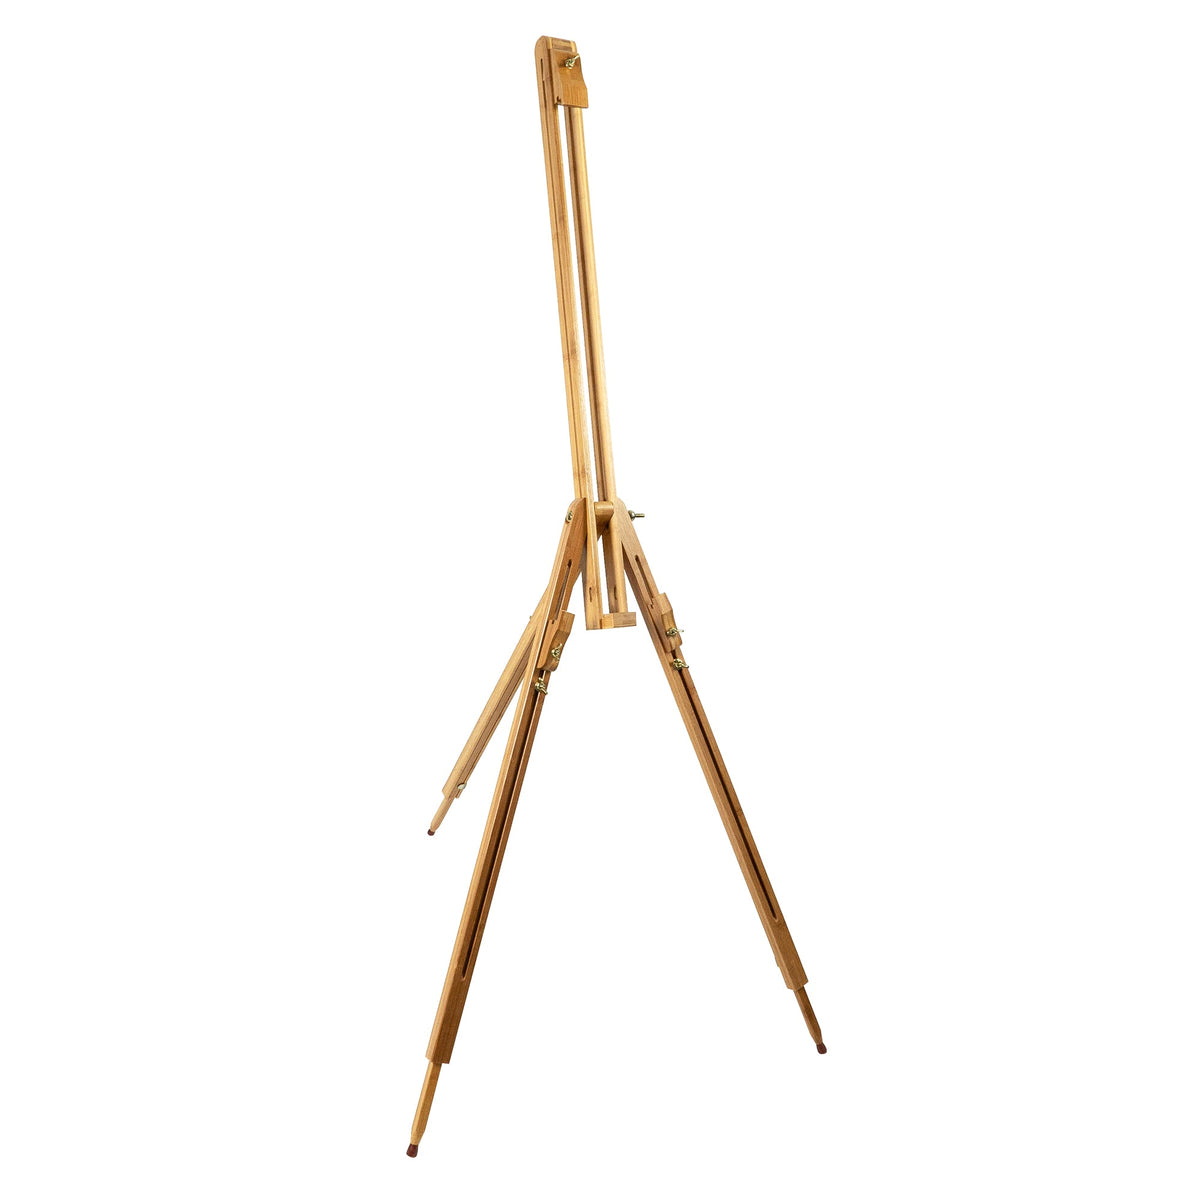 77 Professional Travel Easel Stand With Case by Artsmith